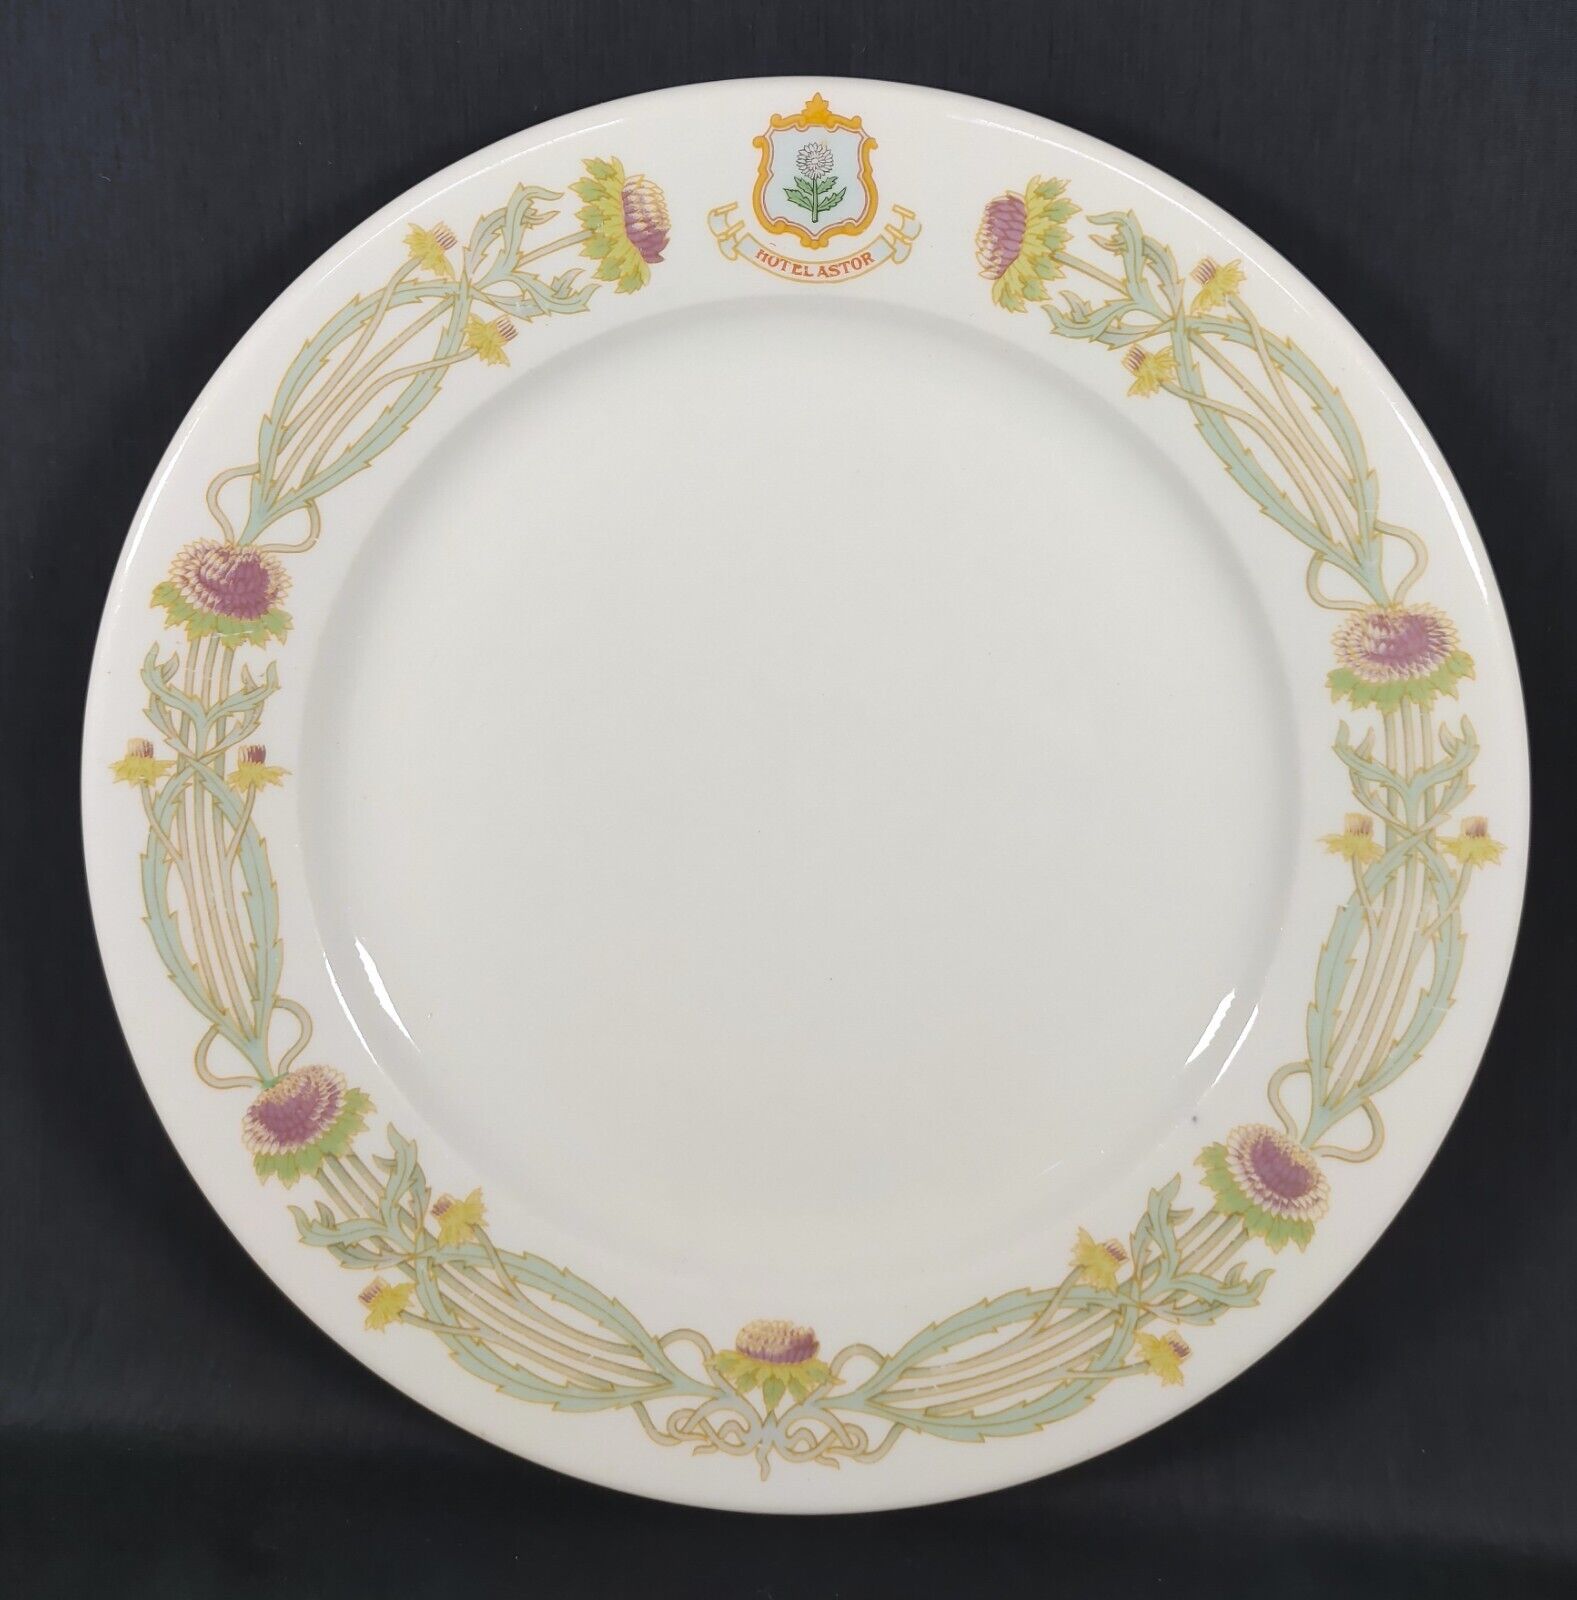 Vintage Buffalo China Restaurant Ware Luncheon Plate from the Hotel Astor, NYC